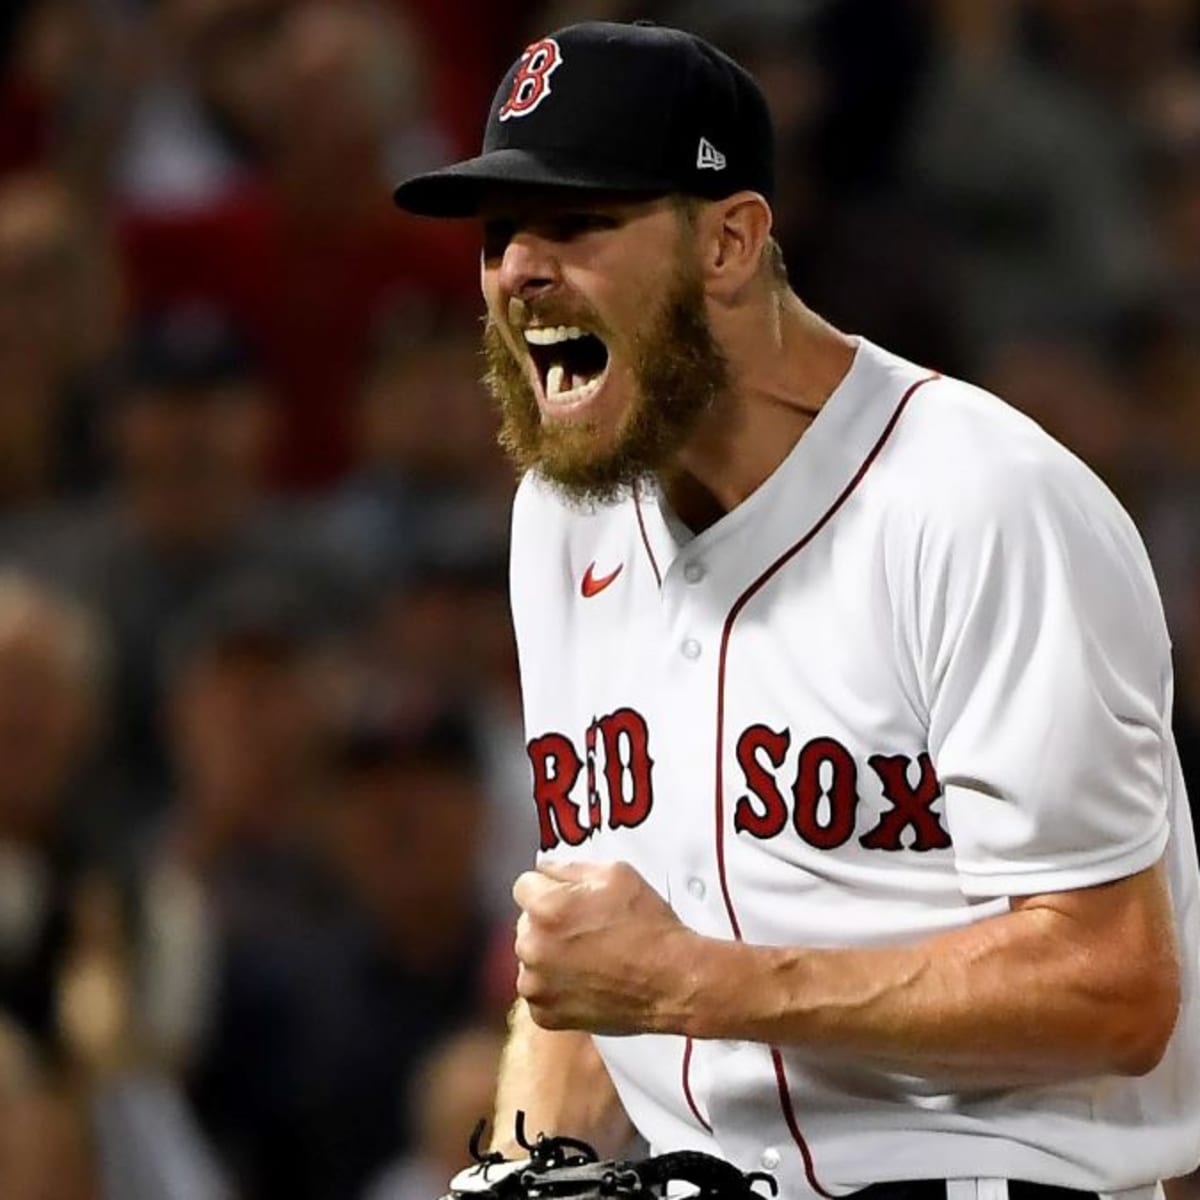 Teams react to Chicago White Sox pitcher Chris Sale cutting his